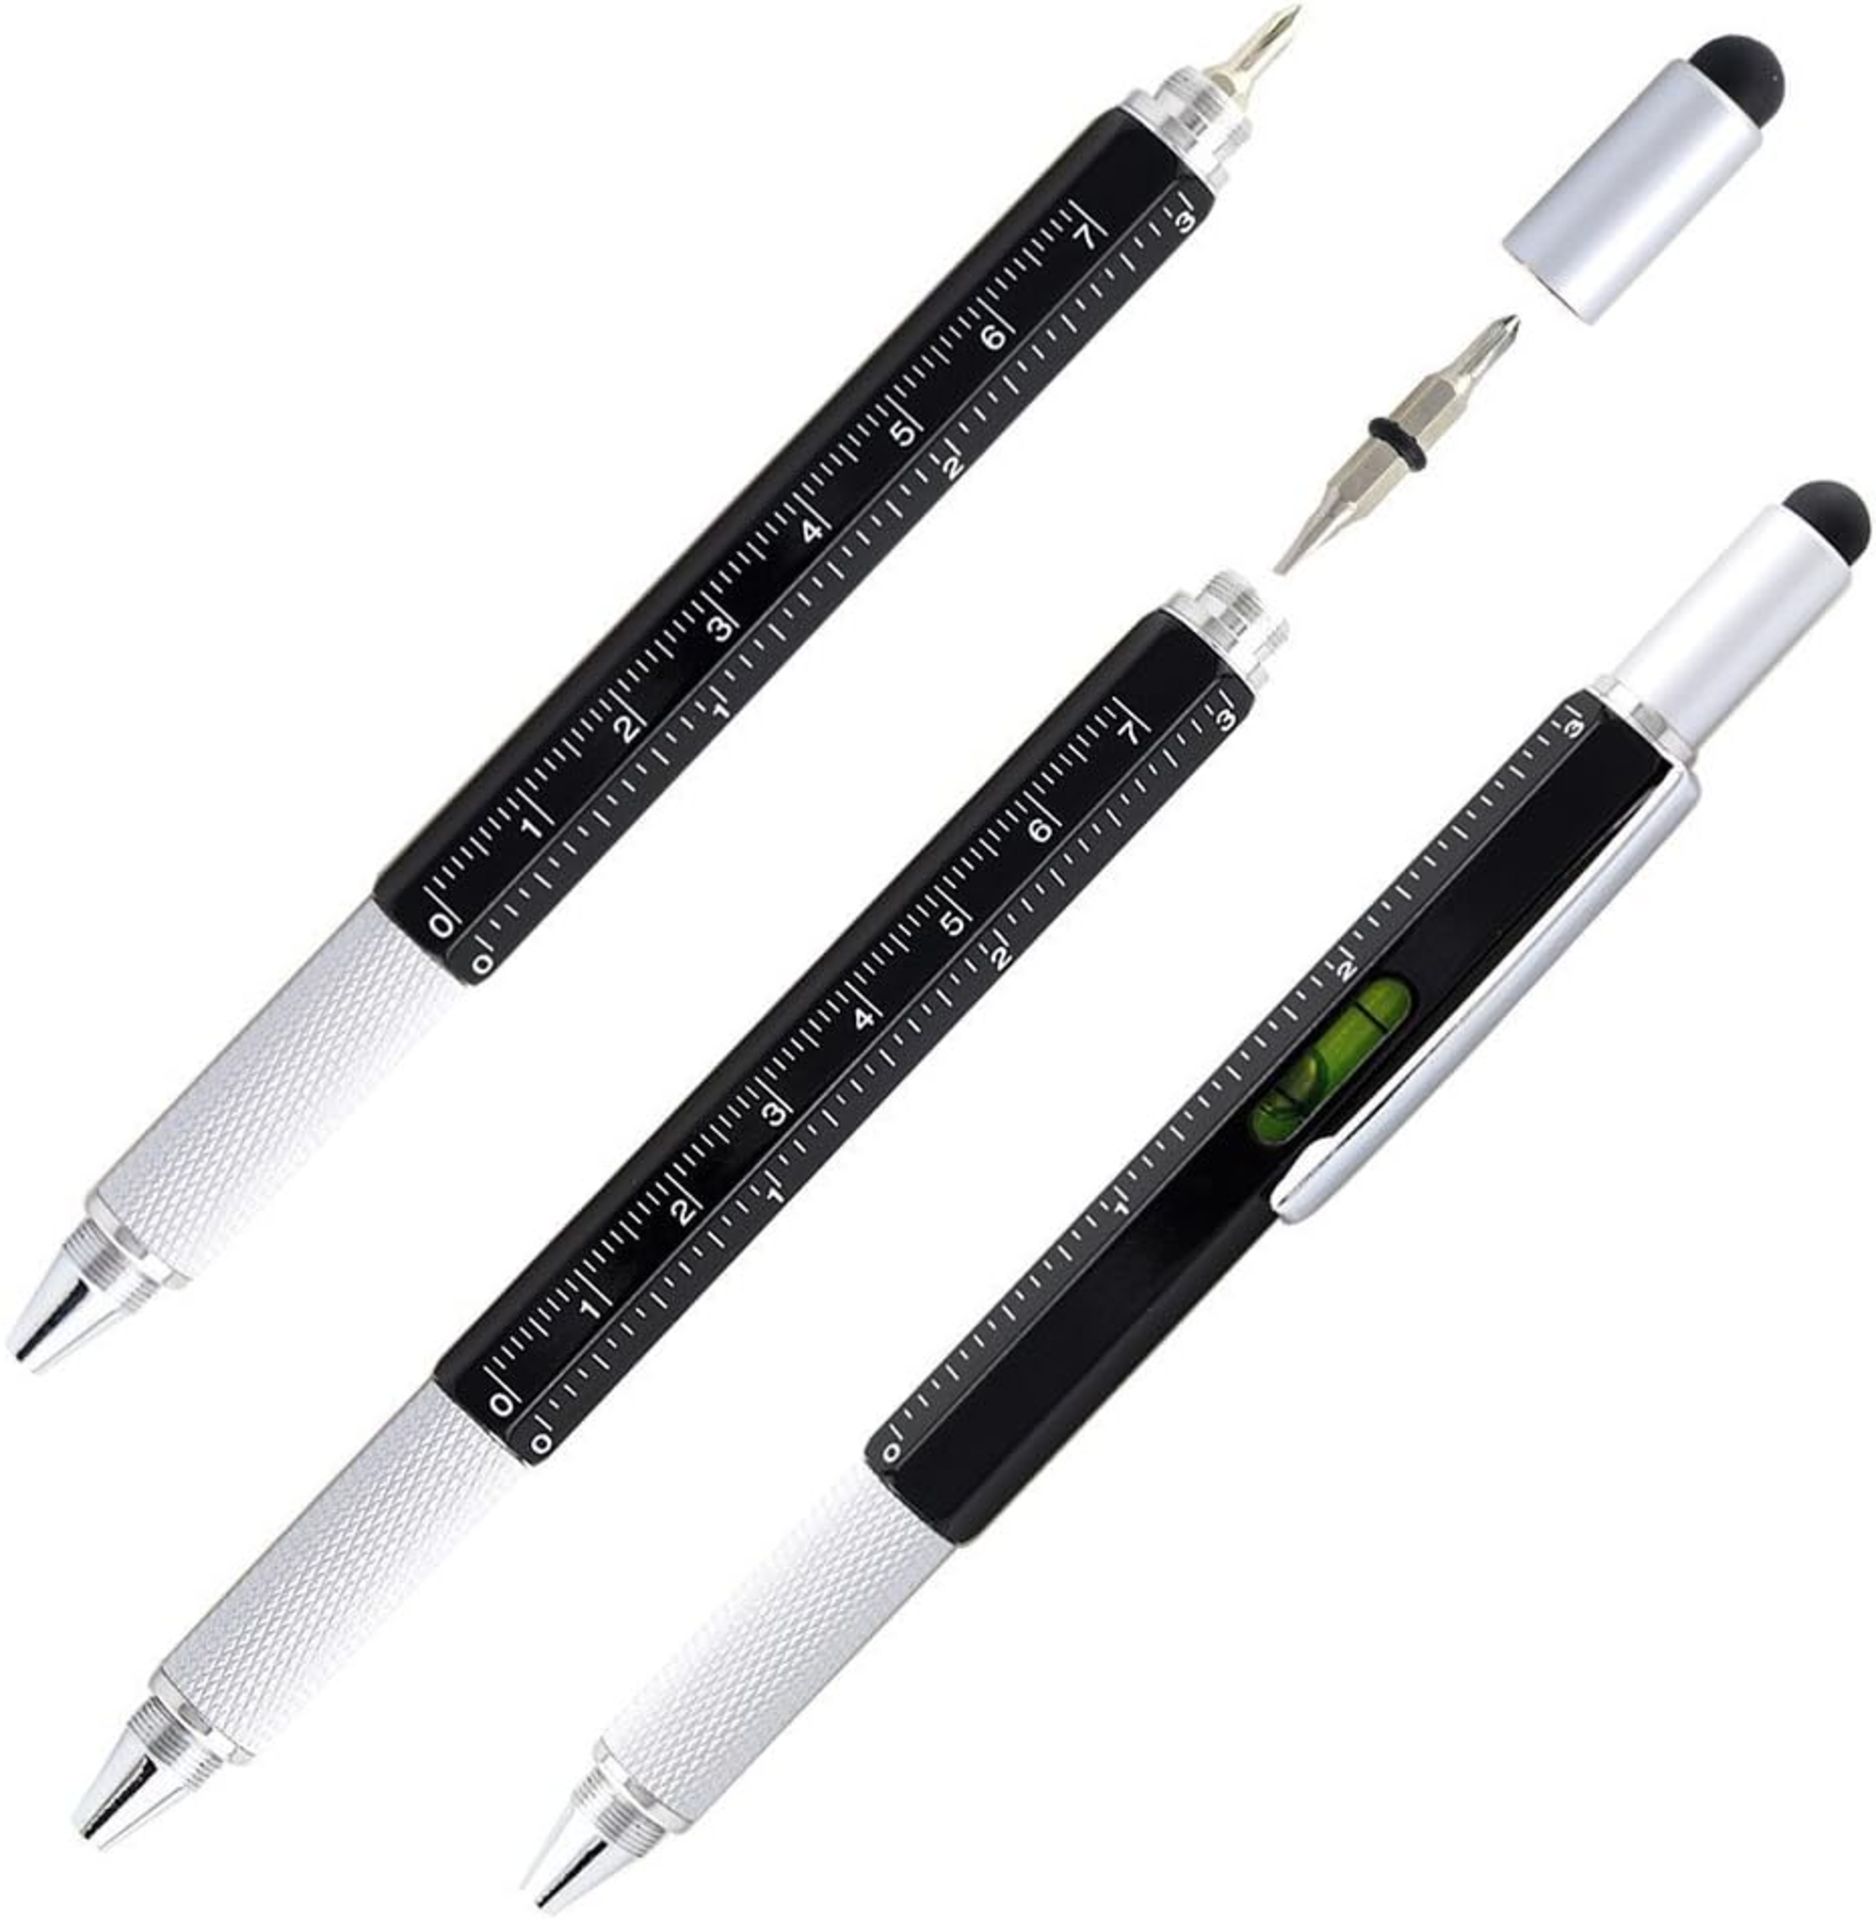 50x BRAND NEW 6 in 1 Tool Pen with Ruler, Level, Touch Screen Stylus, Phillips and Phillips